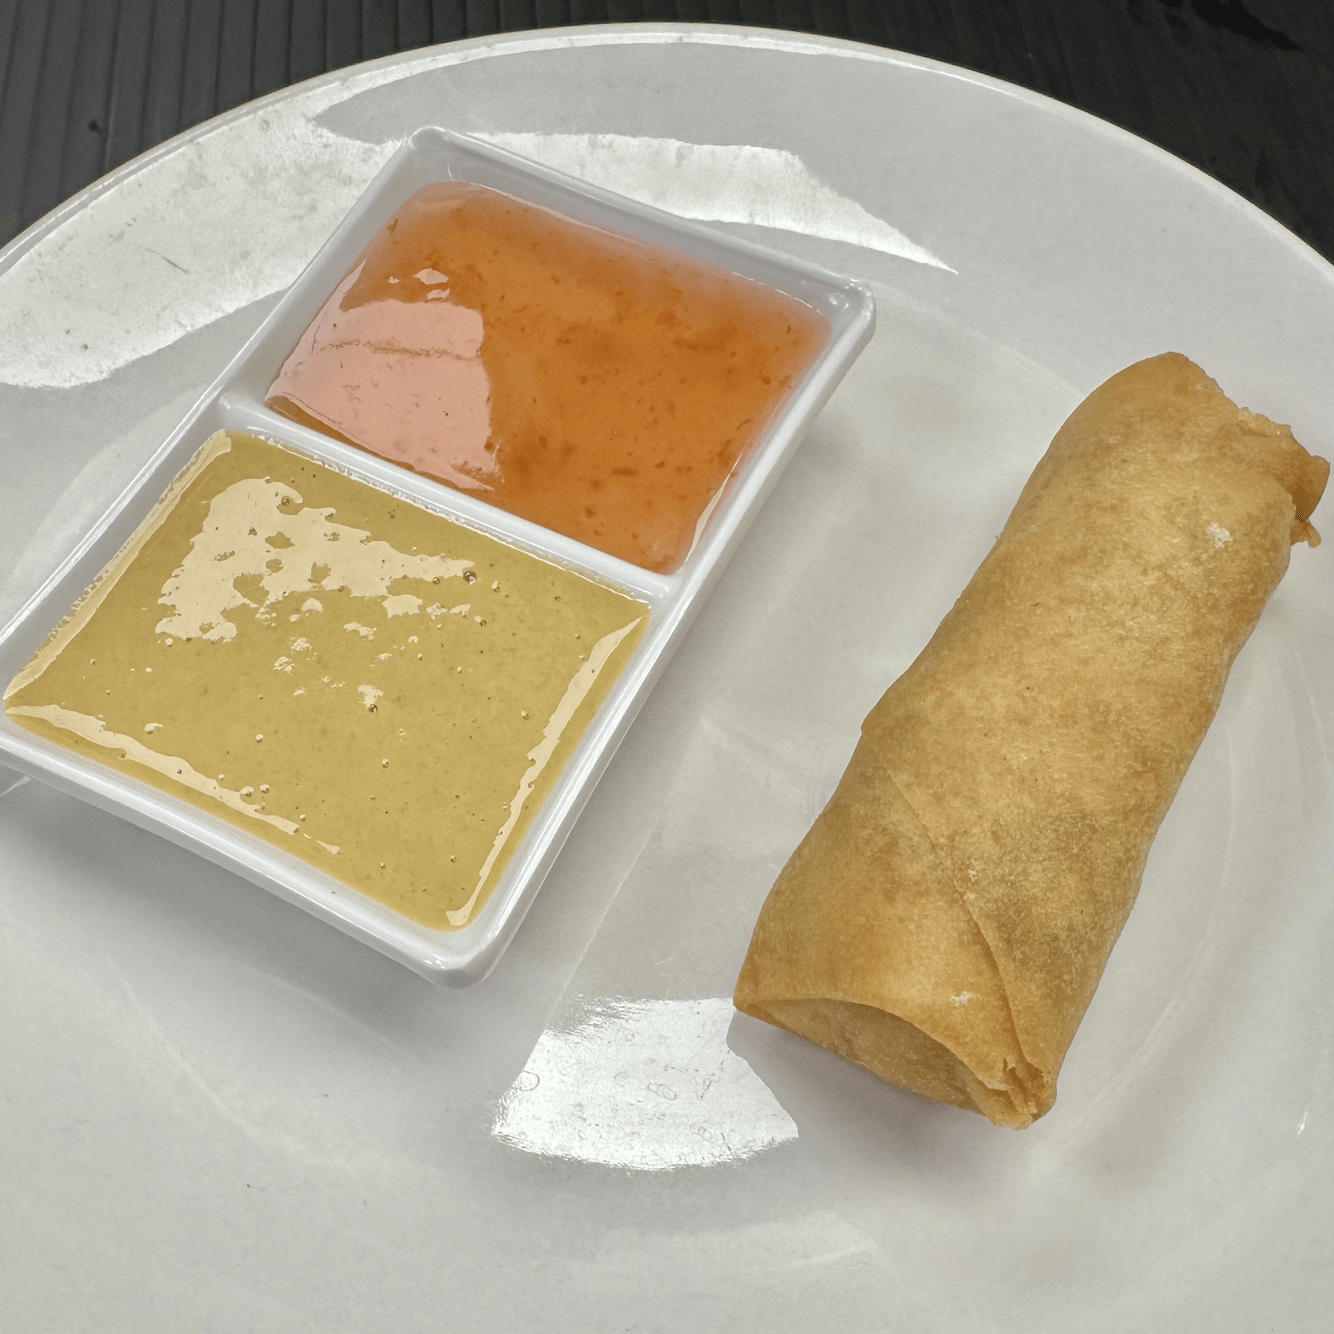 House-Made Spring Rolls